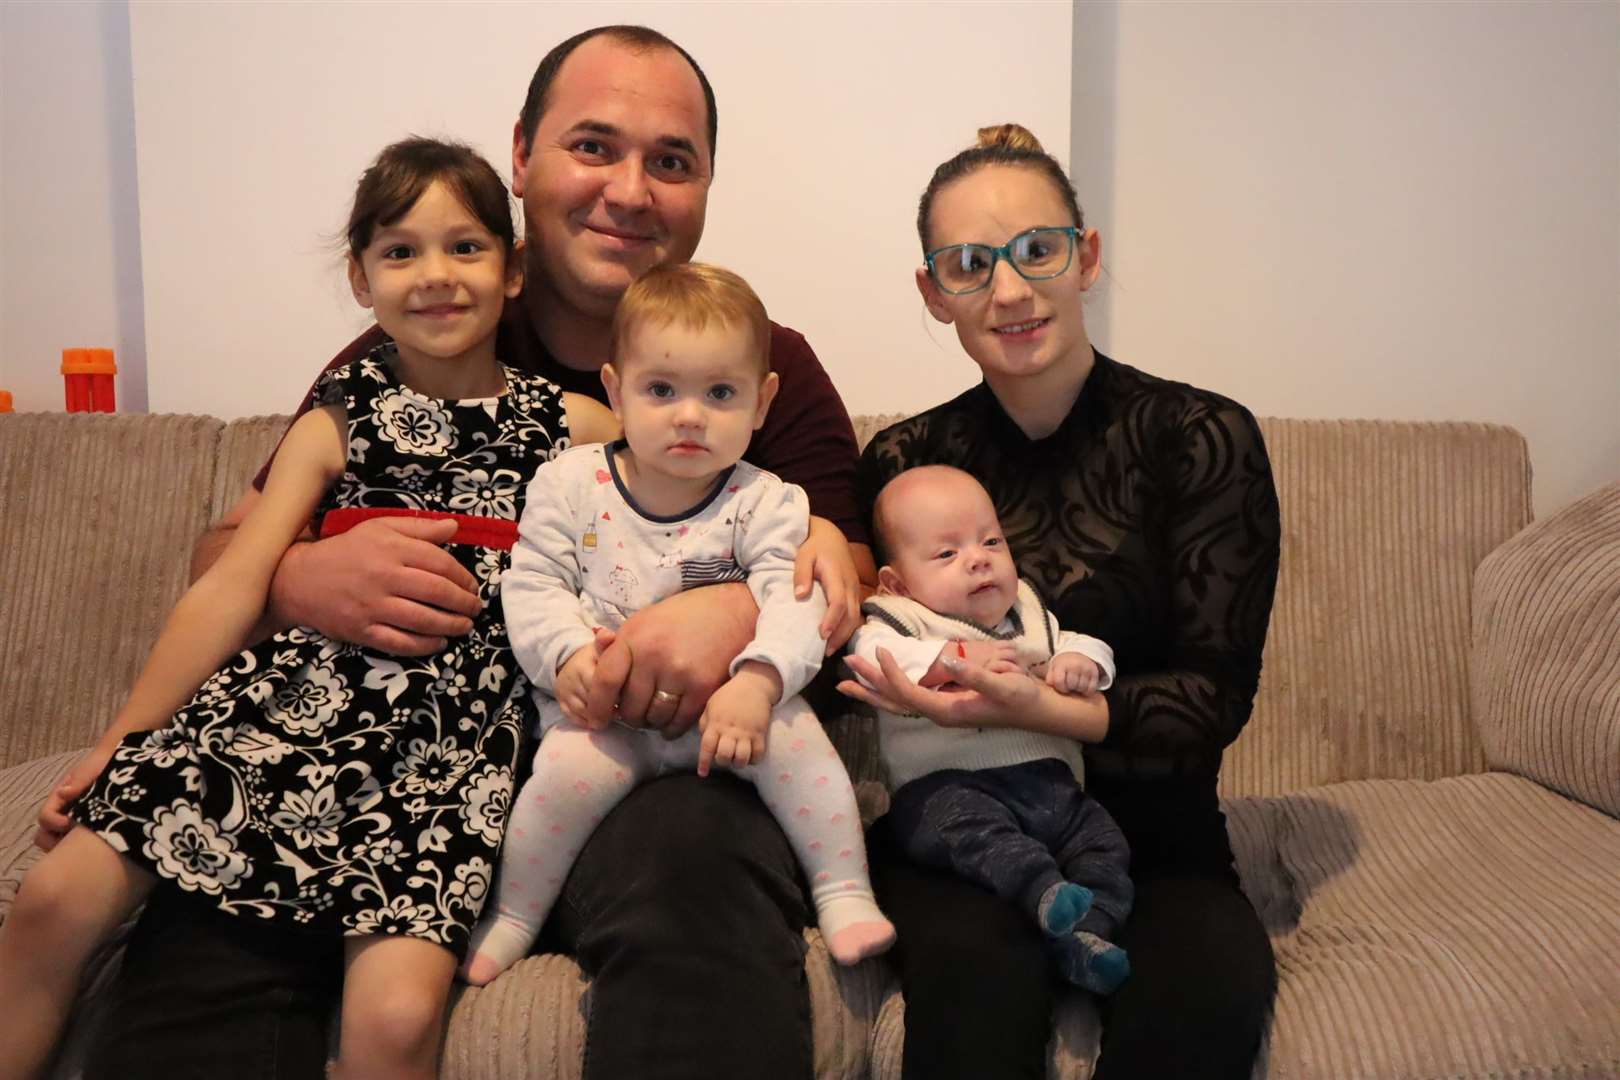 The Dutuc family at home in Castle Street, Queenborough. From the left: Anna-Jarla, 5, dad Alexandru, Anna-Karina, 16 months, baby Alexandru-Loachim and mum Eliza